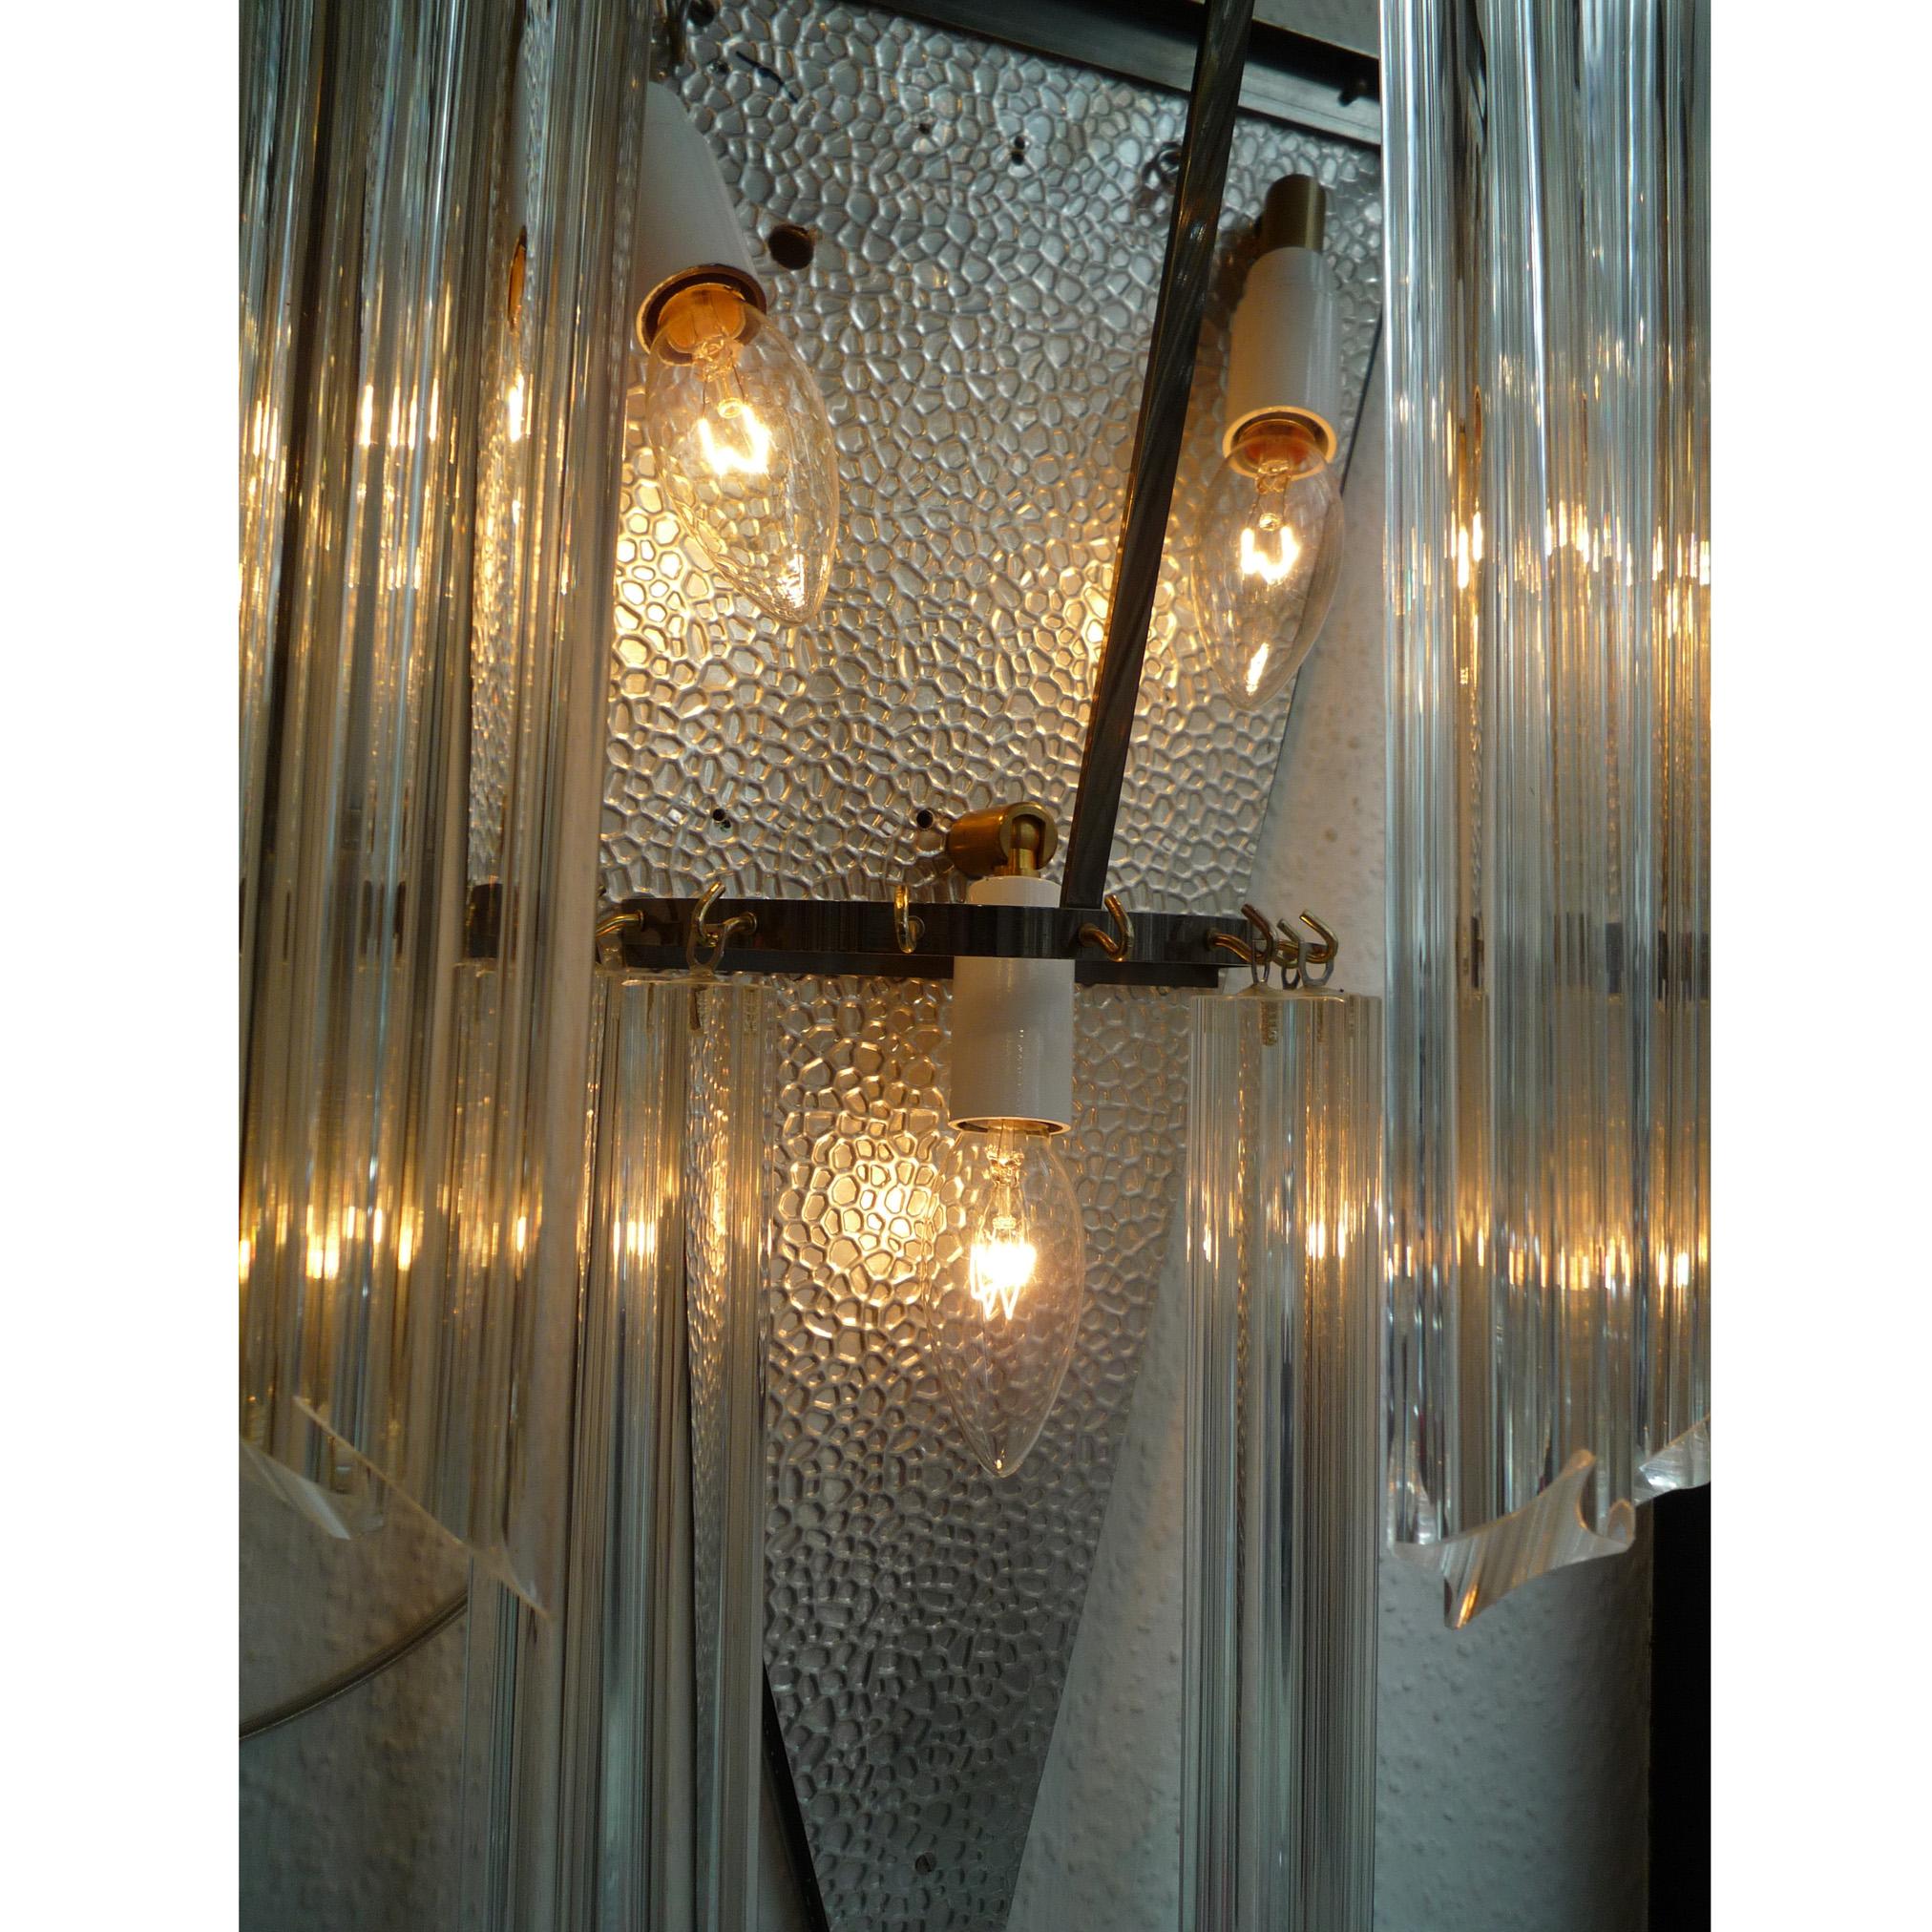 Midcentury wall lamp, Italy, 1960s 

Classic wall lamp of the mid-20th century in the Venini style with Triedri crystal rods on two floors. The crystal of the wall lamp elegantly refracts the light from the three lighting points, giving a very